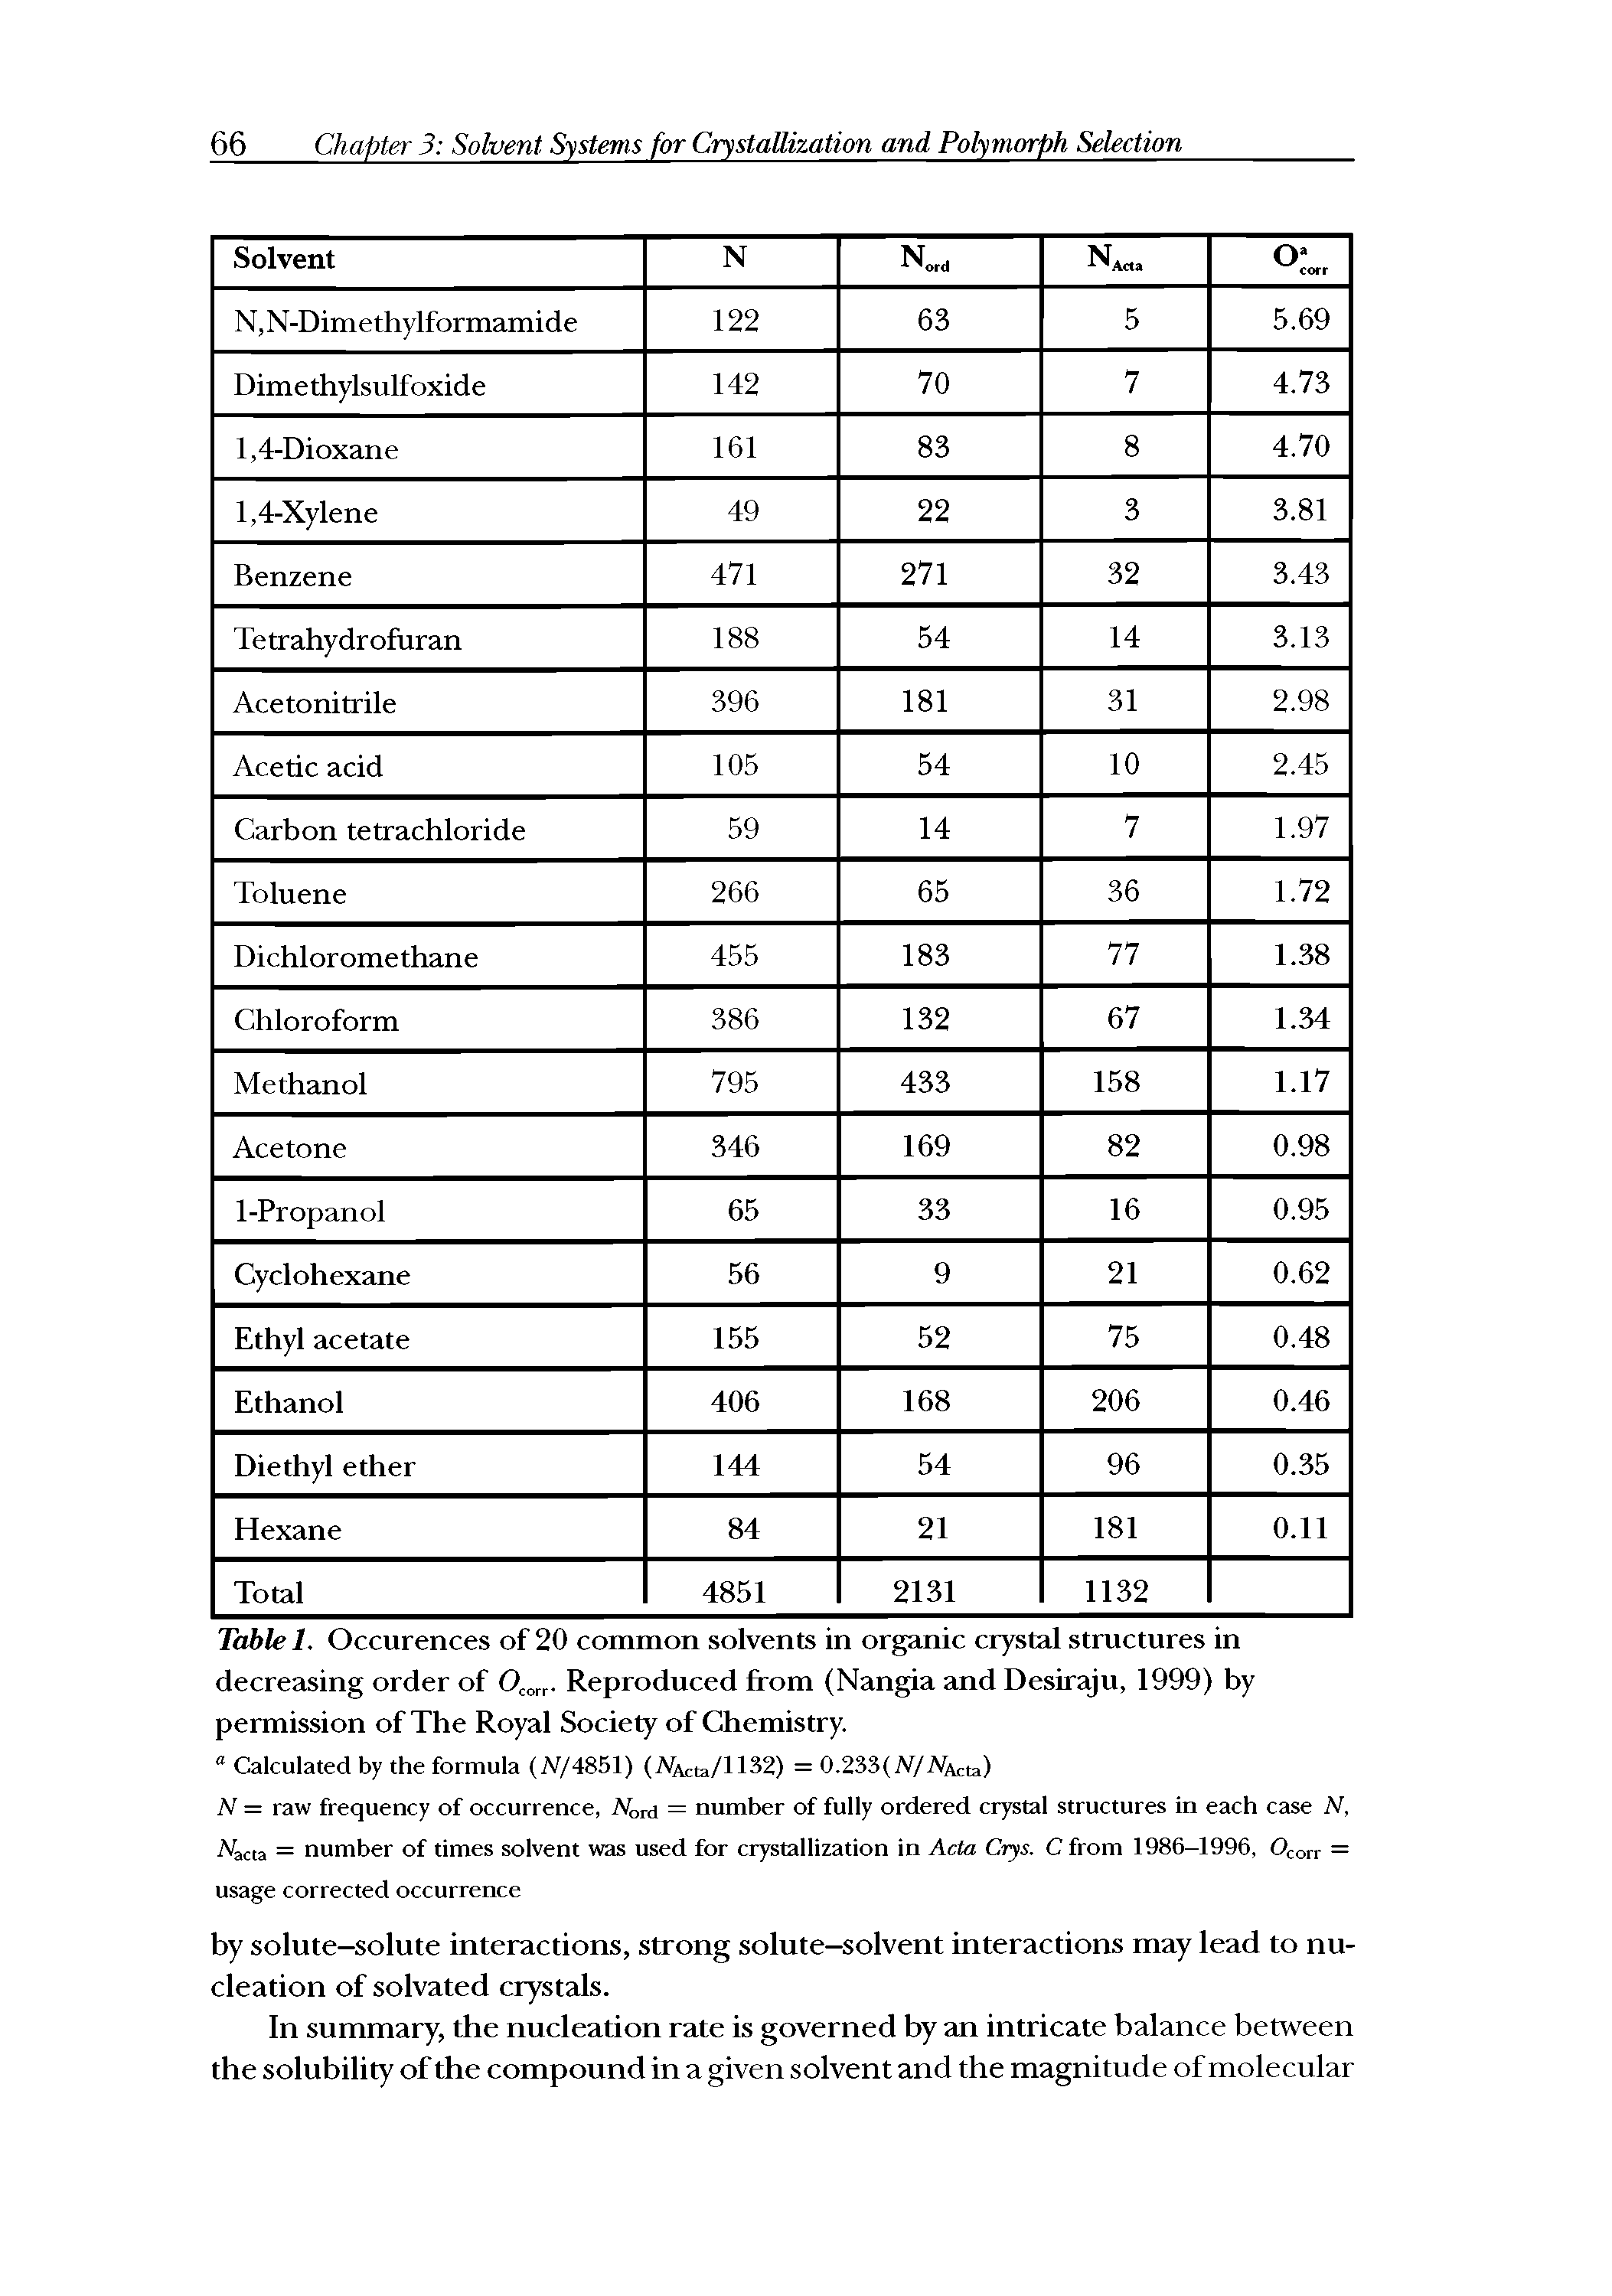 Table 1. Occurences of 20 common solvents in organic crystal structures in decreasing order of Reproduced from (Nangia and Desiraju, 1999) by permission of The Royal Society of Chemistry.